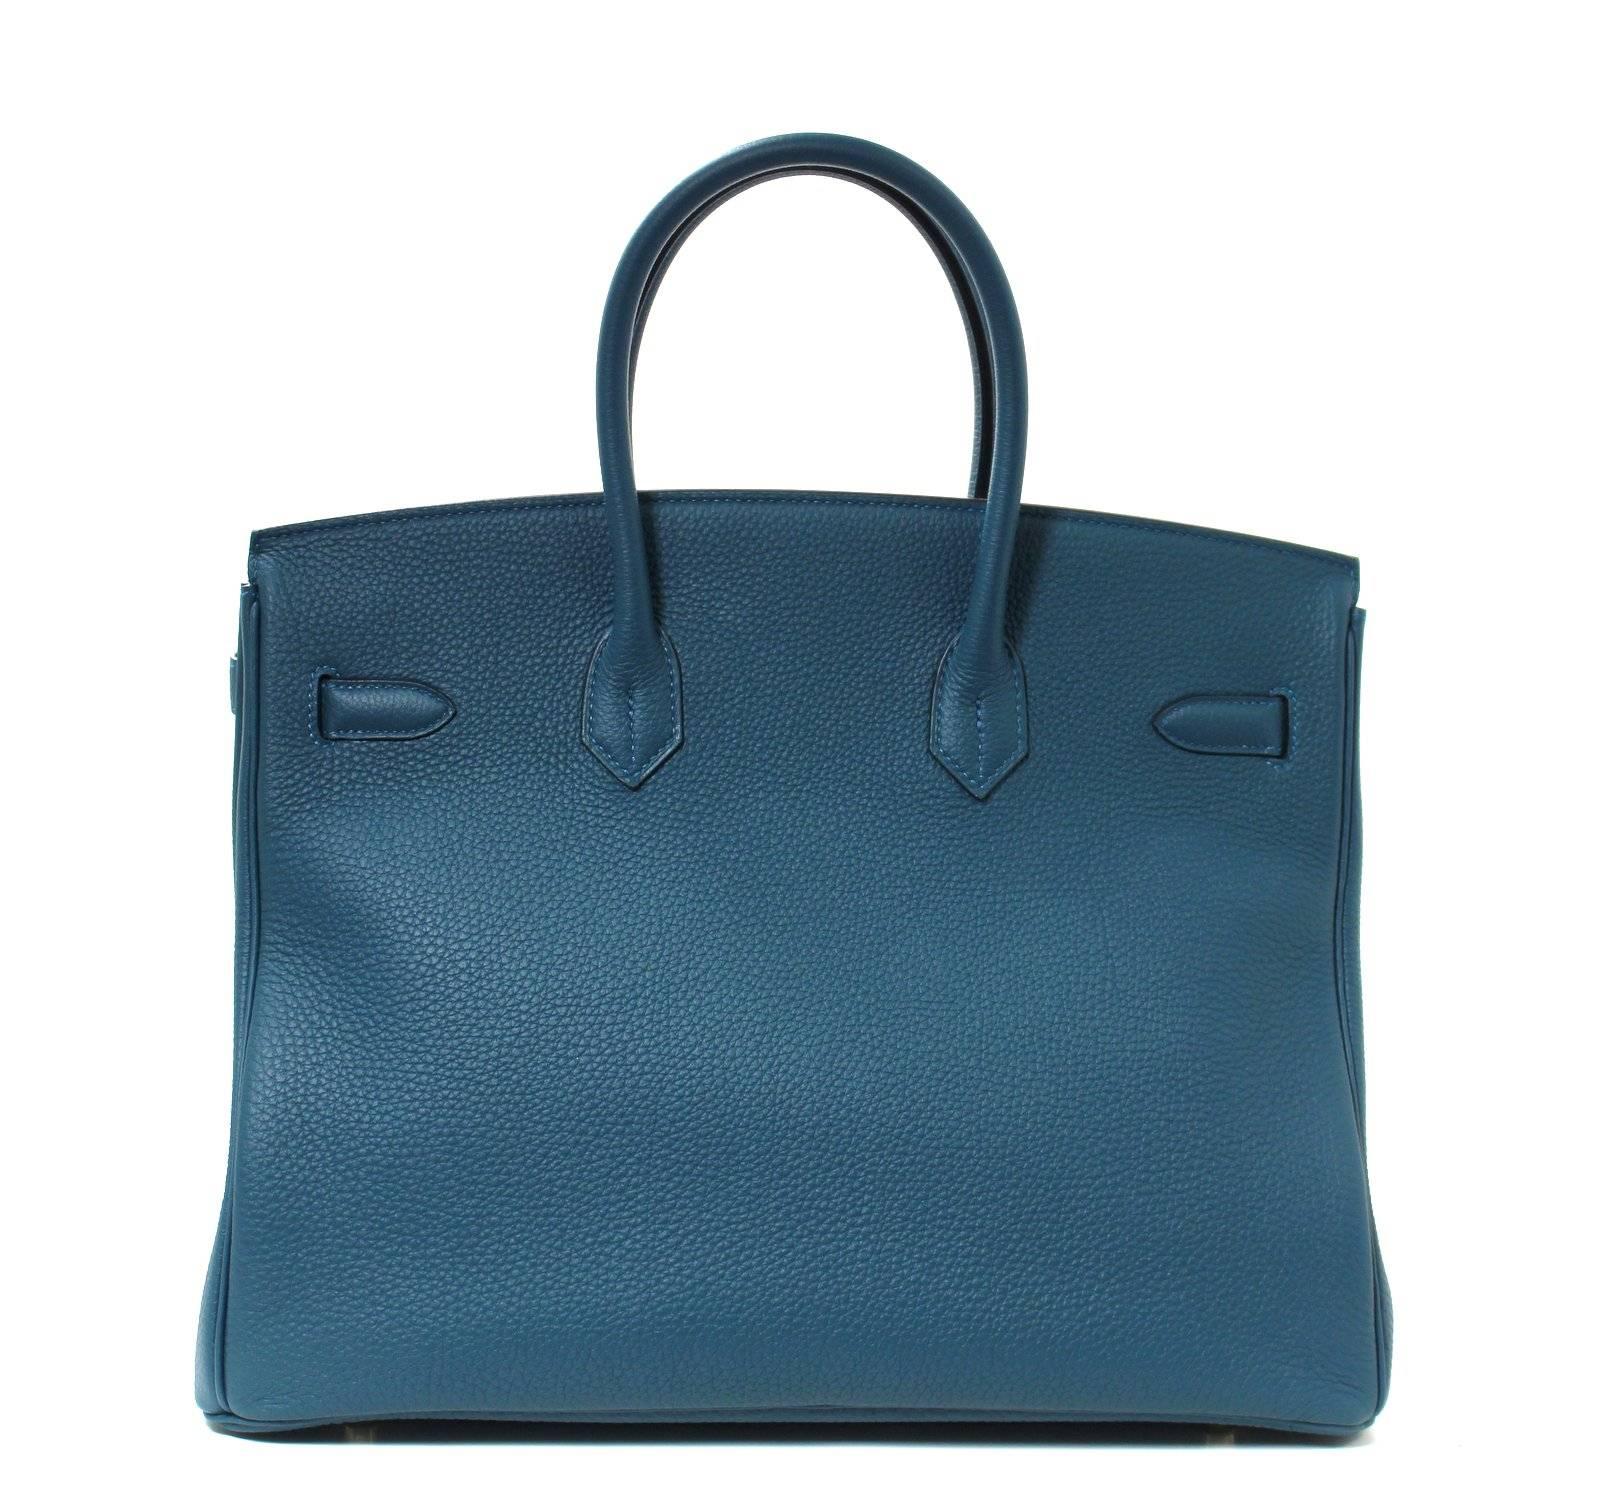 Pristine, store fresh condition (plastic on hardware) Hermès Birkin Bag in BLUE COLVERT Togo Leather with GOLD hardware, 35 cm size T stamp
Crafted by hand and considered by many as the epitome of luxury items, Birkins are in extremely high demand